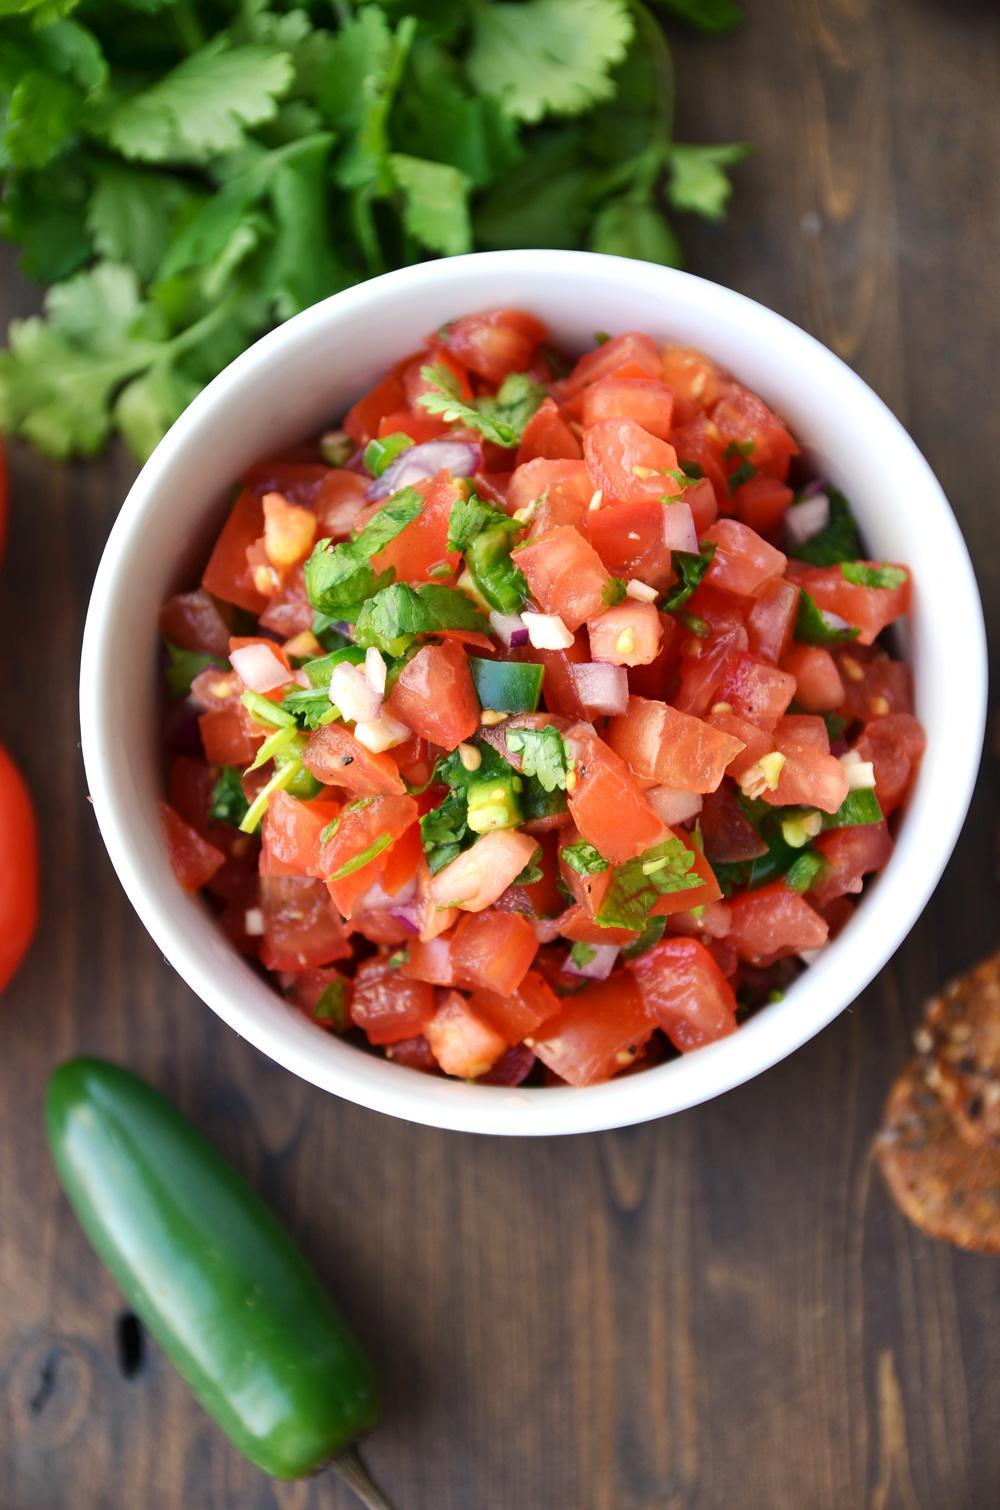 Homemade Salsa Salsa is so easy to make and fresh salsa tastes the best, don t eat those store bough salsa s that are so high in sodium and sugar, try this recipe.